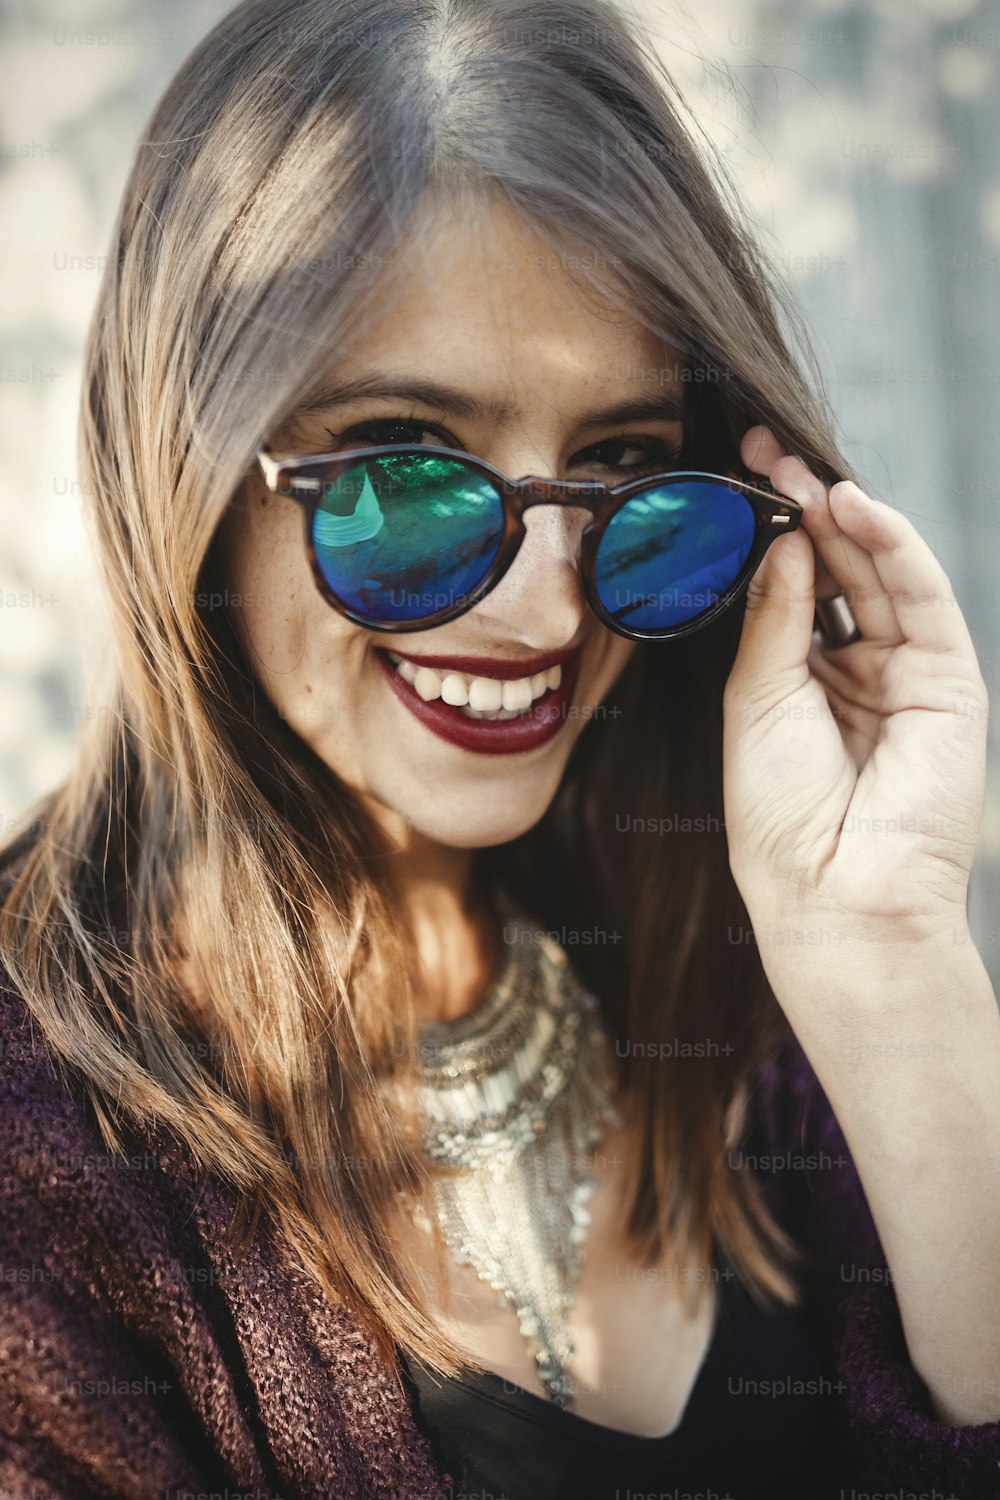 Stylish hipster girl smiling in sunny street on background of wooden wall. Portrait of boho girl in cool outfit and sunglasses posing in sunlight and shadow.  Summer vacation and travel